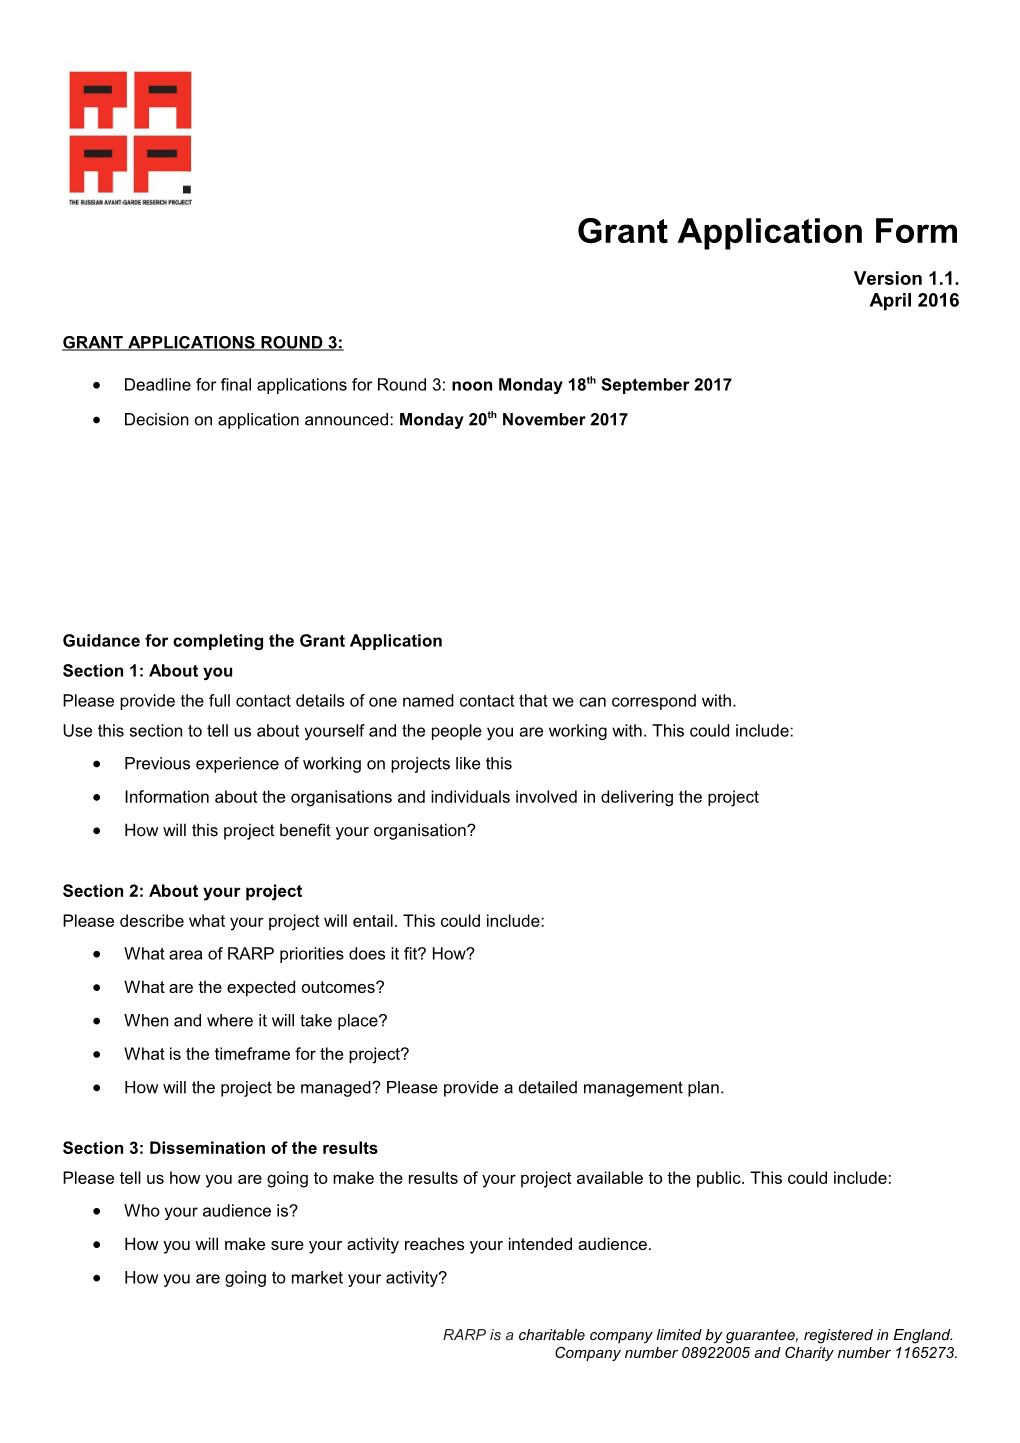 Grant Applications Round 3